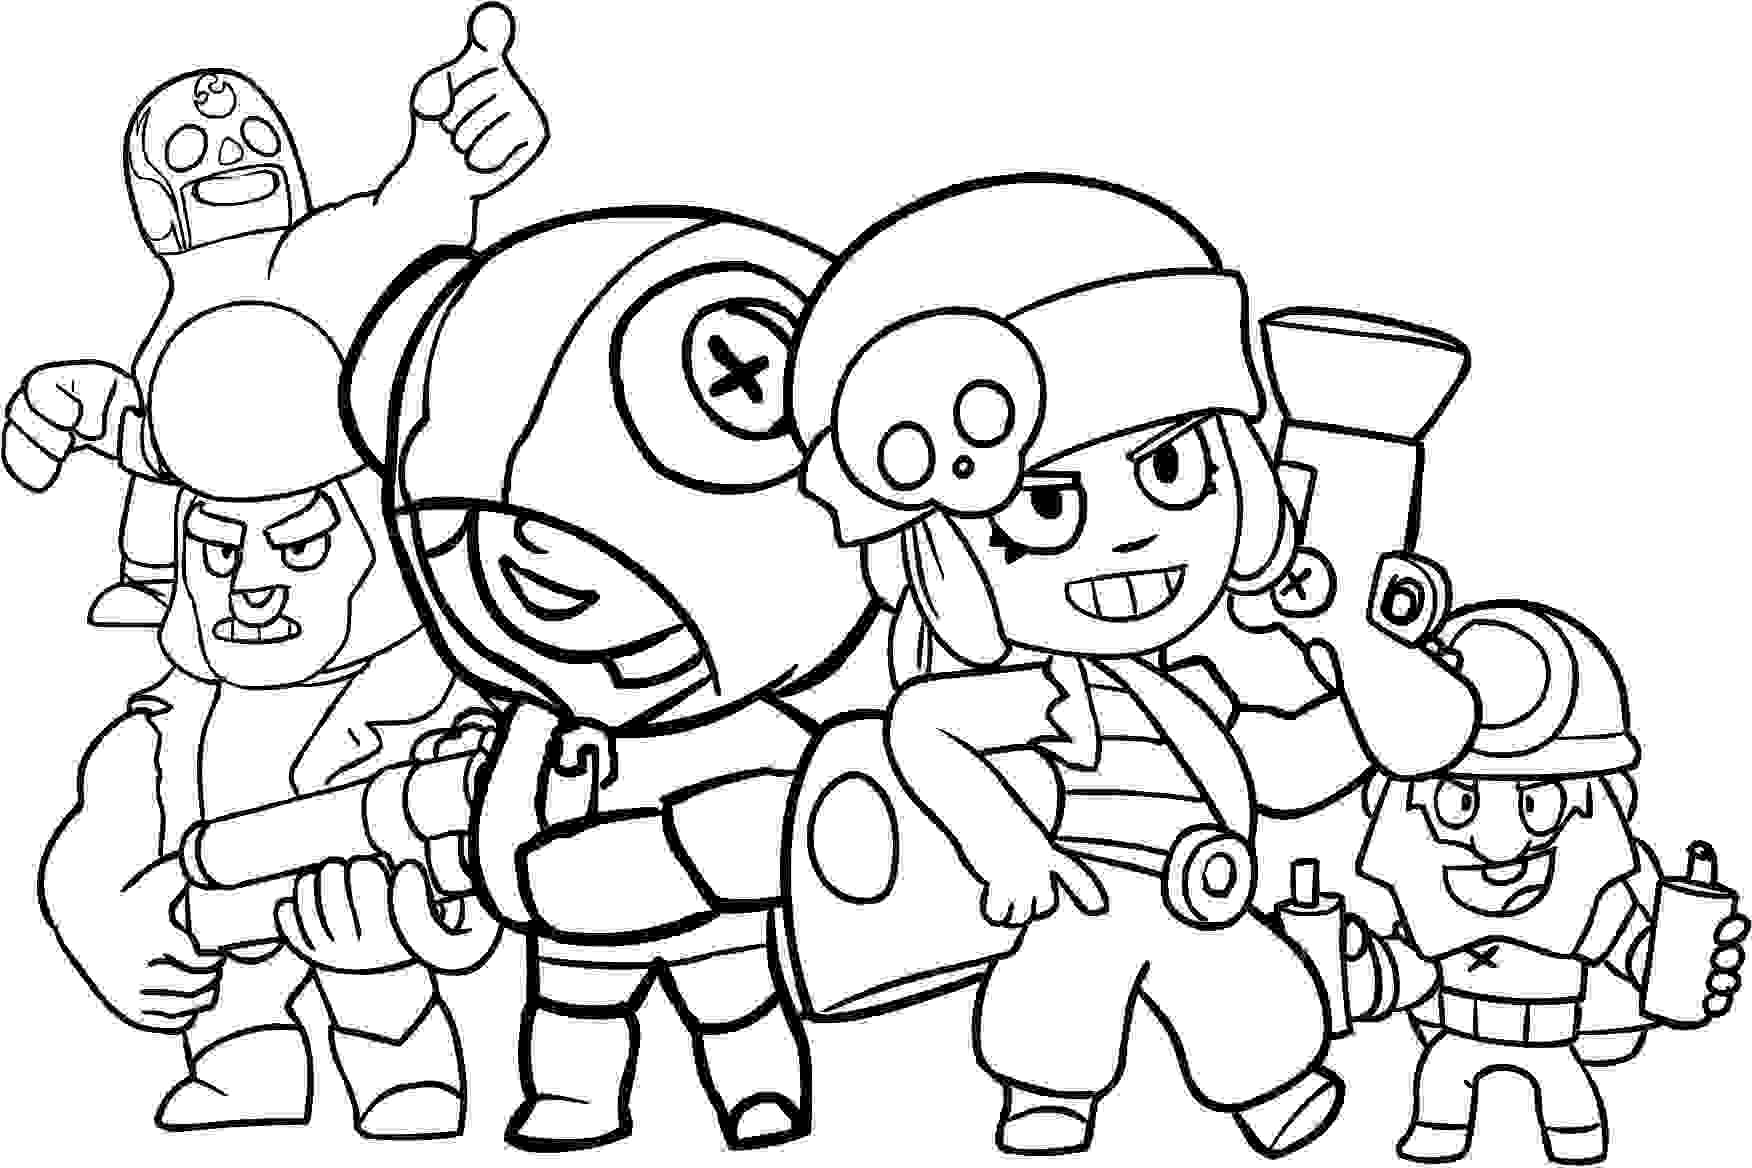 Brawl Stars Characters Dynamike Leon Penny El Primo And Bull Coloring Pages Brawl Stars Coloring Pages Coloring Pages For Kids And Adults - legendary brawlers brawl stars coloring pages